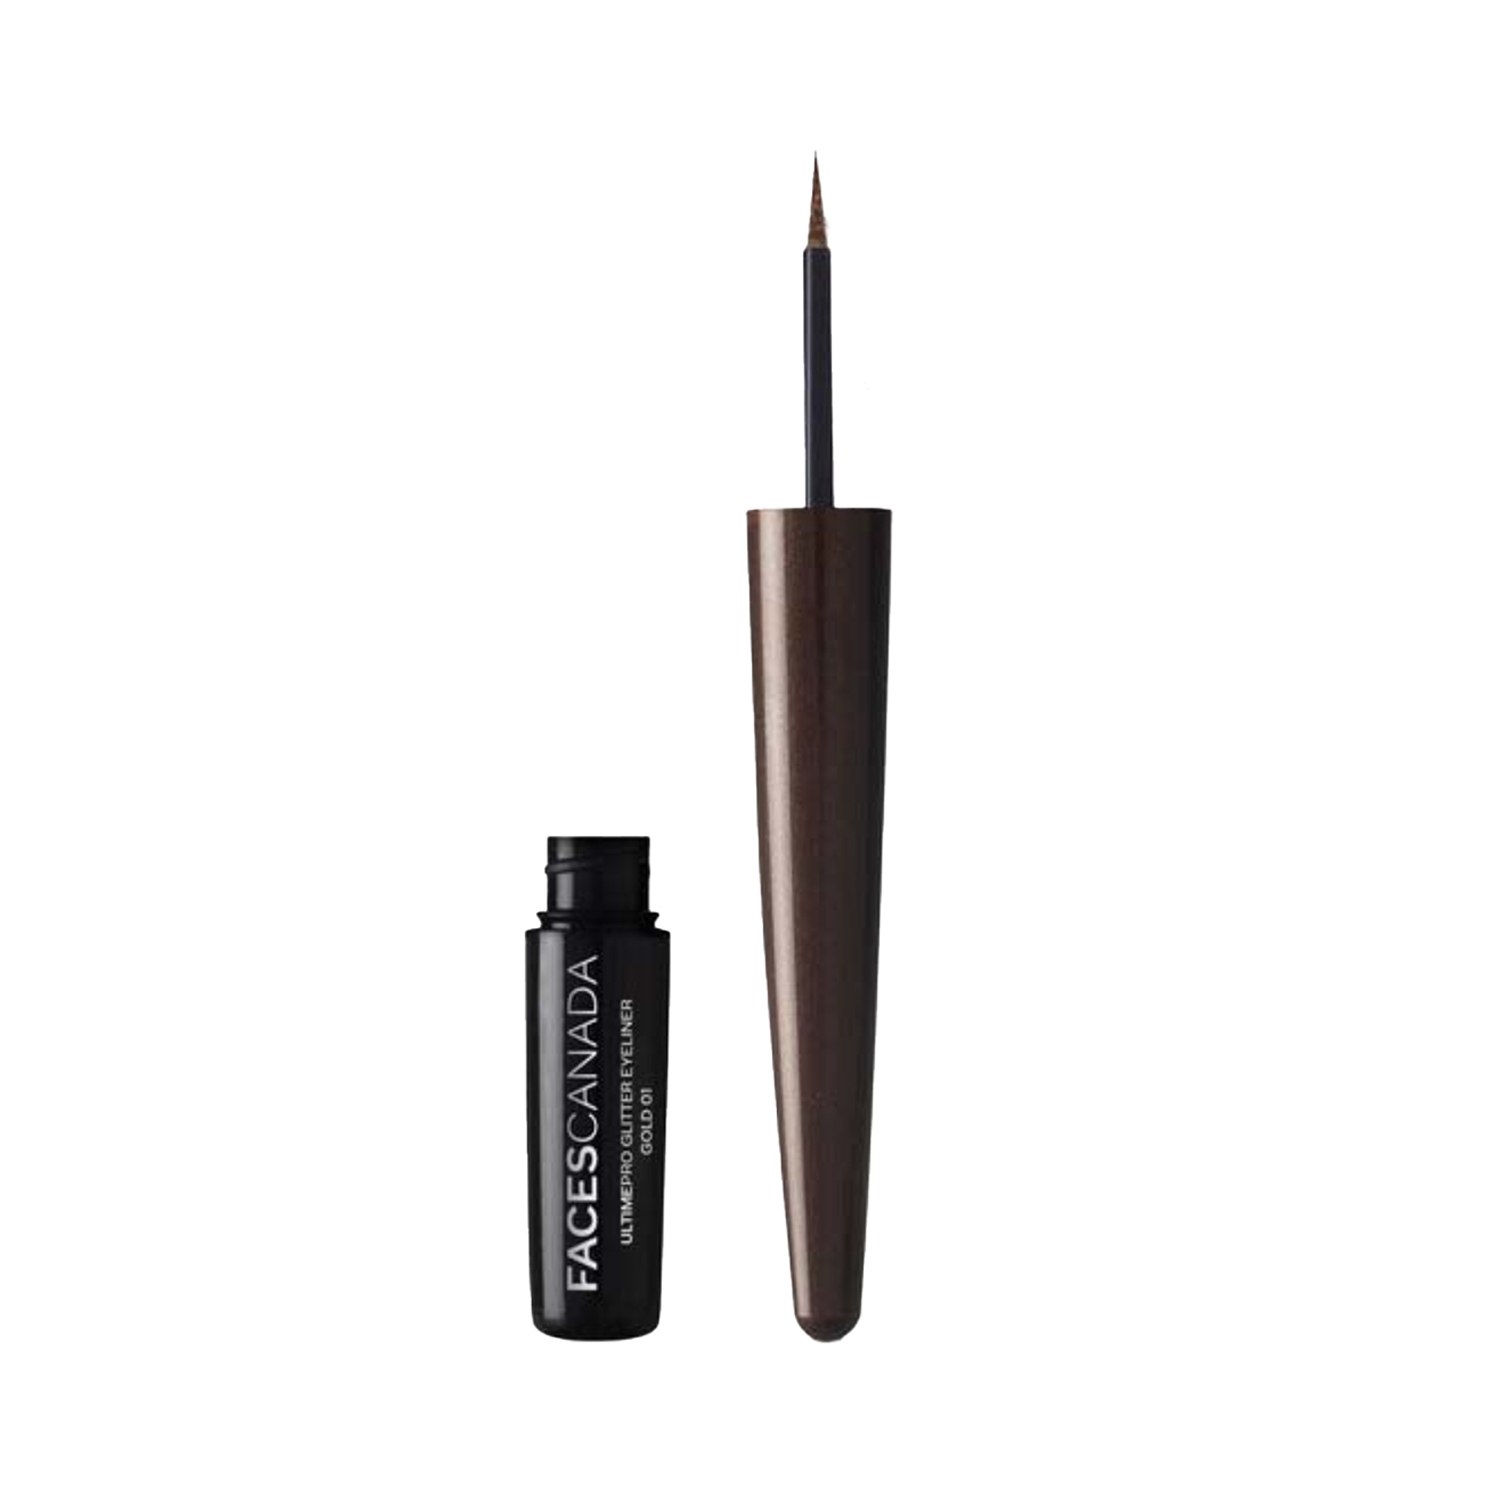 Faces Canada | Faces Canada Ultime Pro Glitter Eyeliner - 02 Copper (1.7ml)